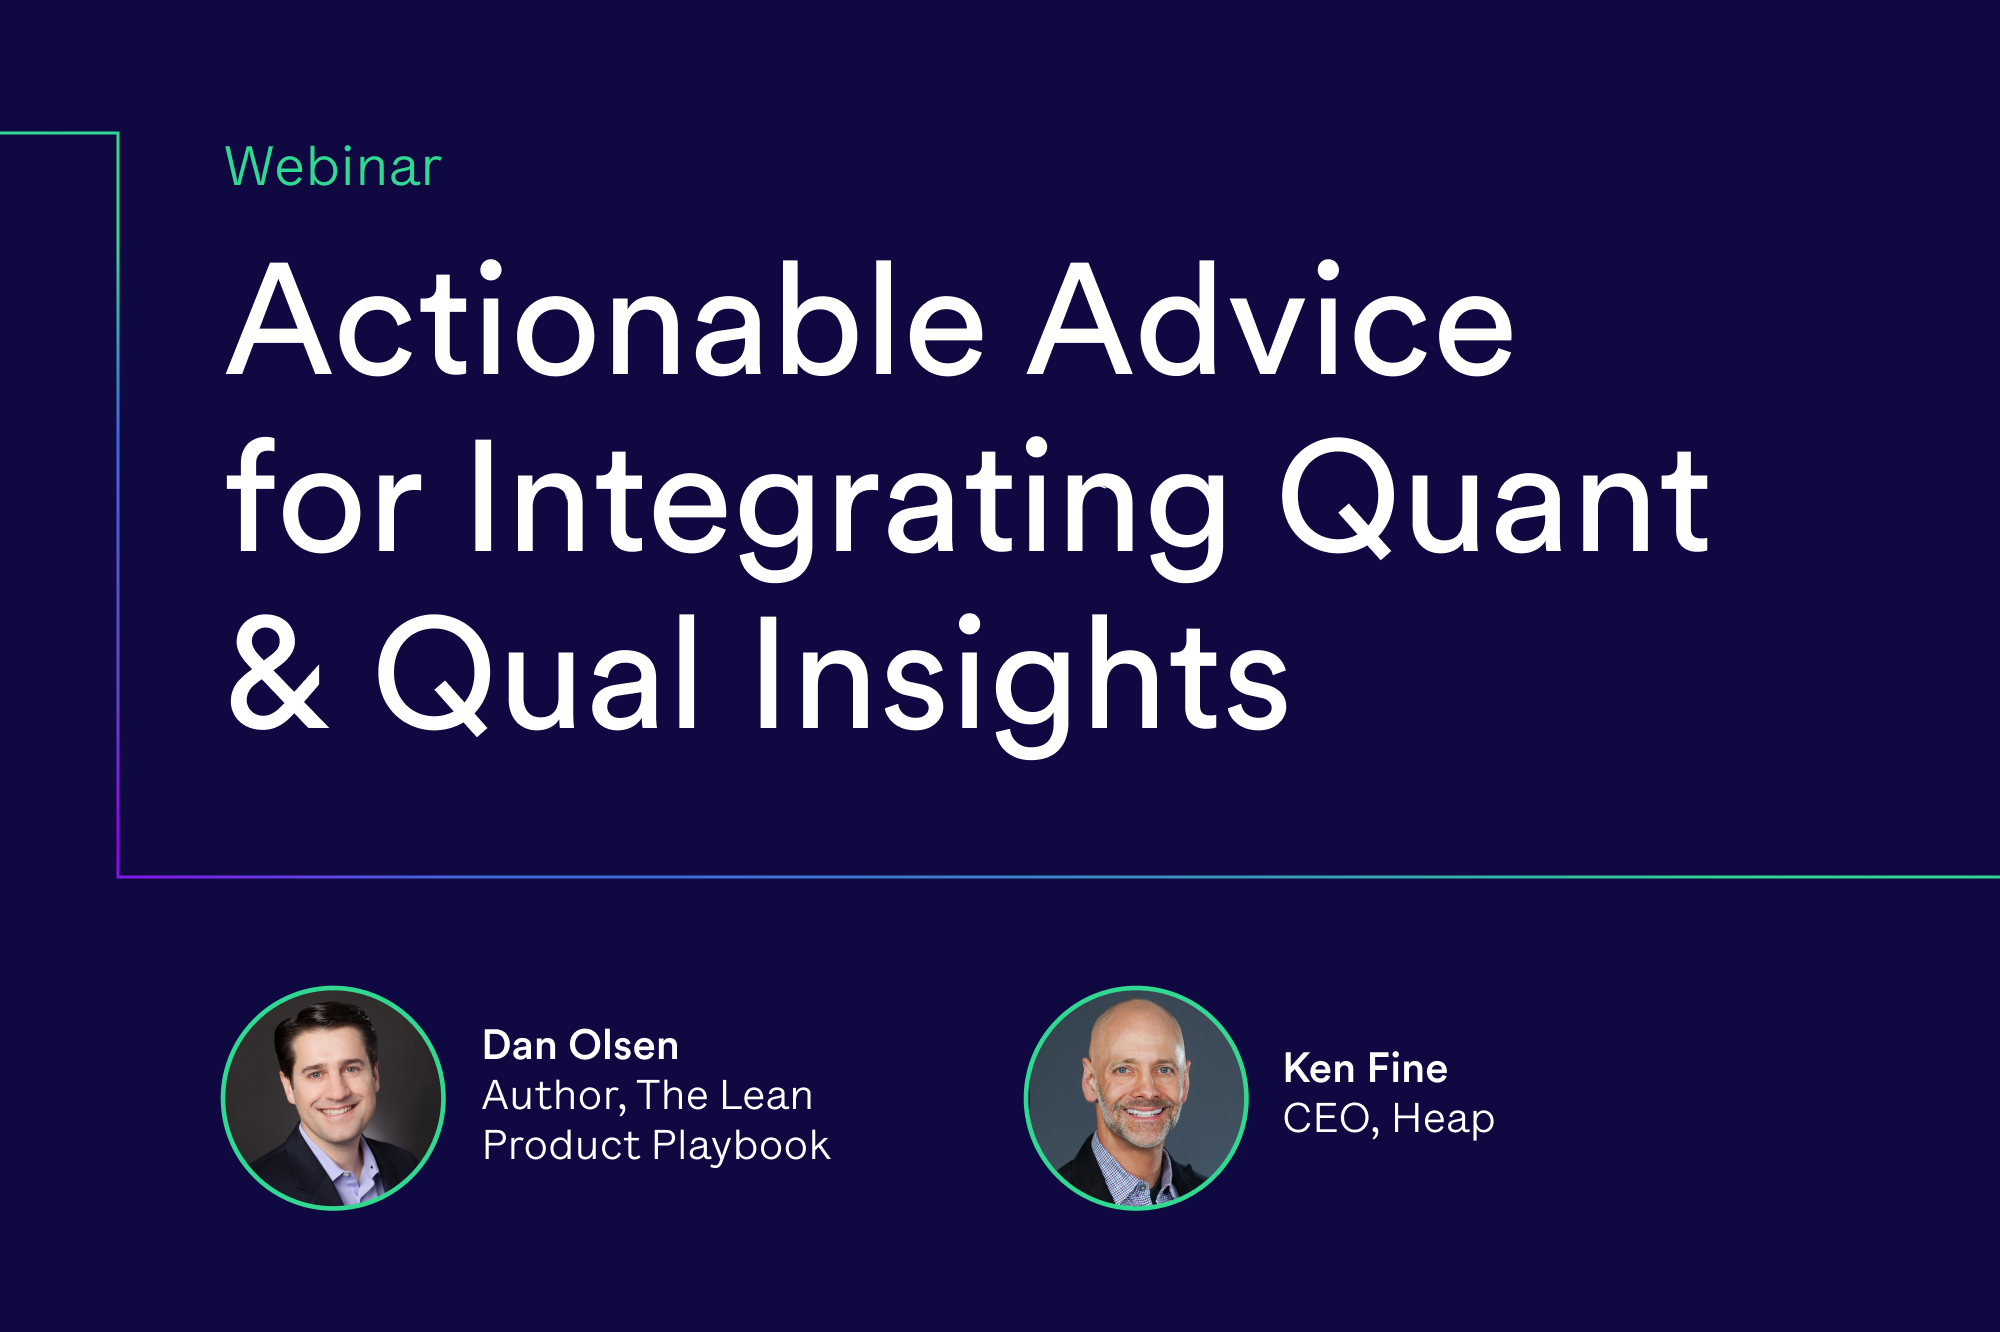 Webinar: Actionable Advice for Integrating Quant & Qual Insights with Dan Olsen and Ken Fine